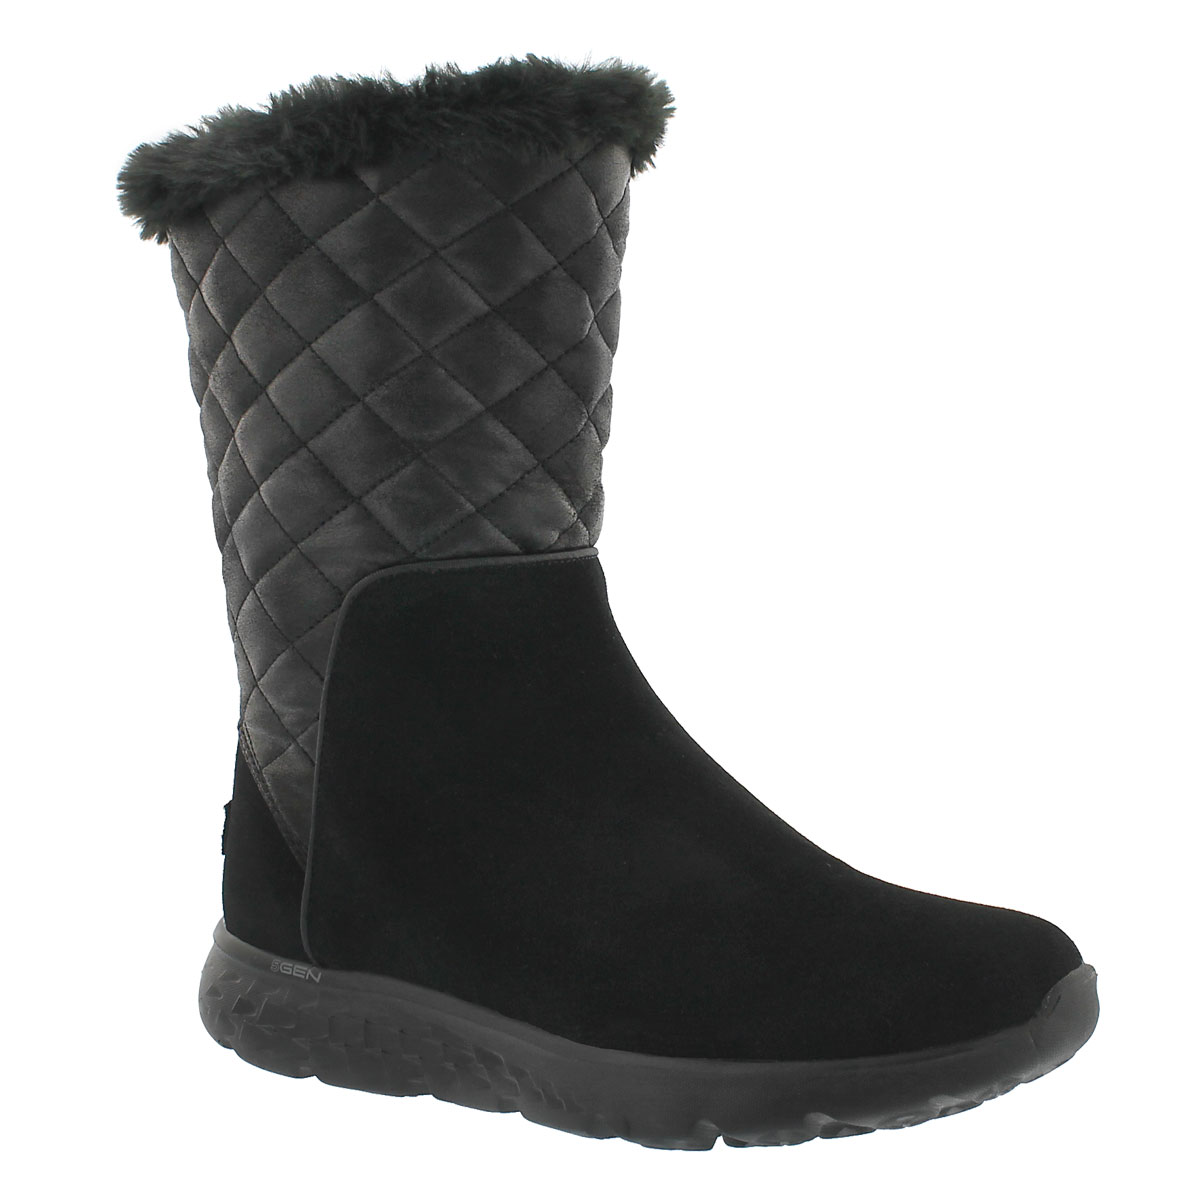 Skechers Women's On-The-Go 400 Snugly Quilted Pull On Mid Calf Boot | eBay